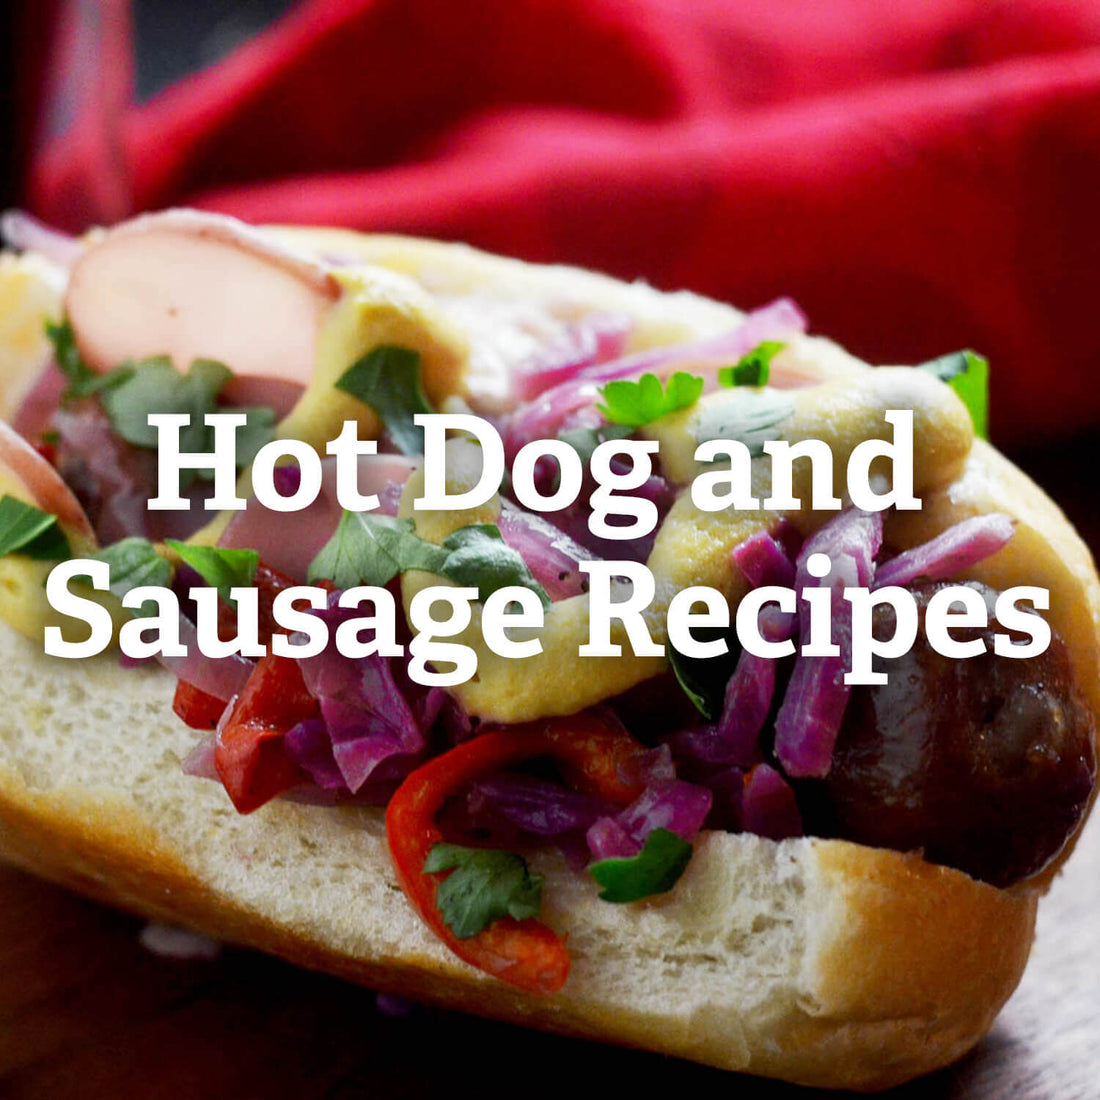 Grilled Hot Dog and Sausage Recipes